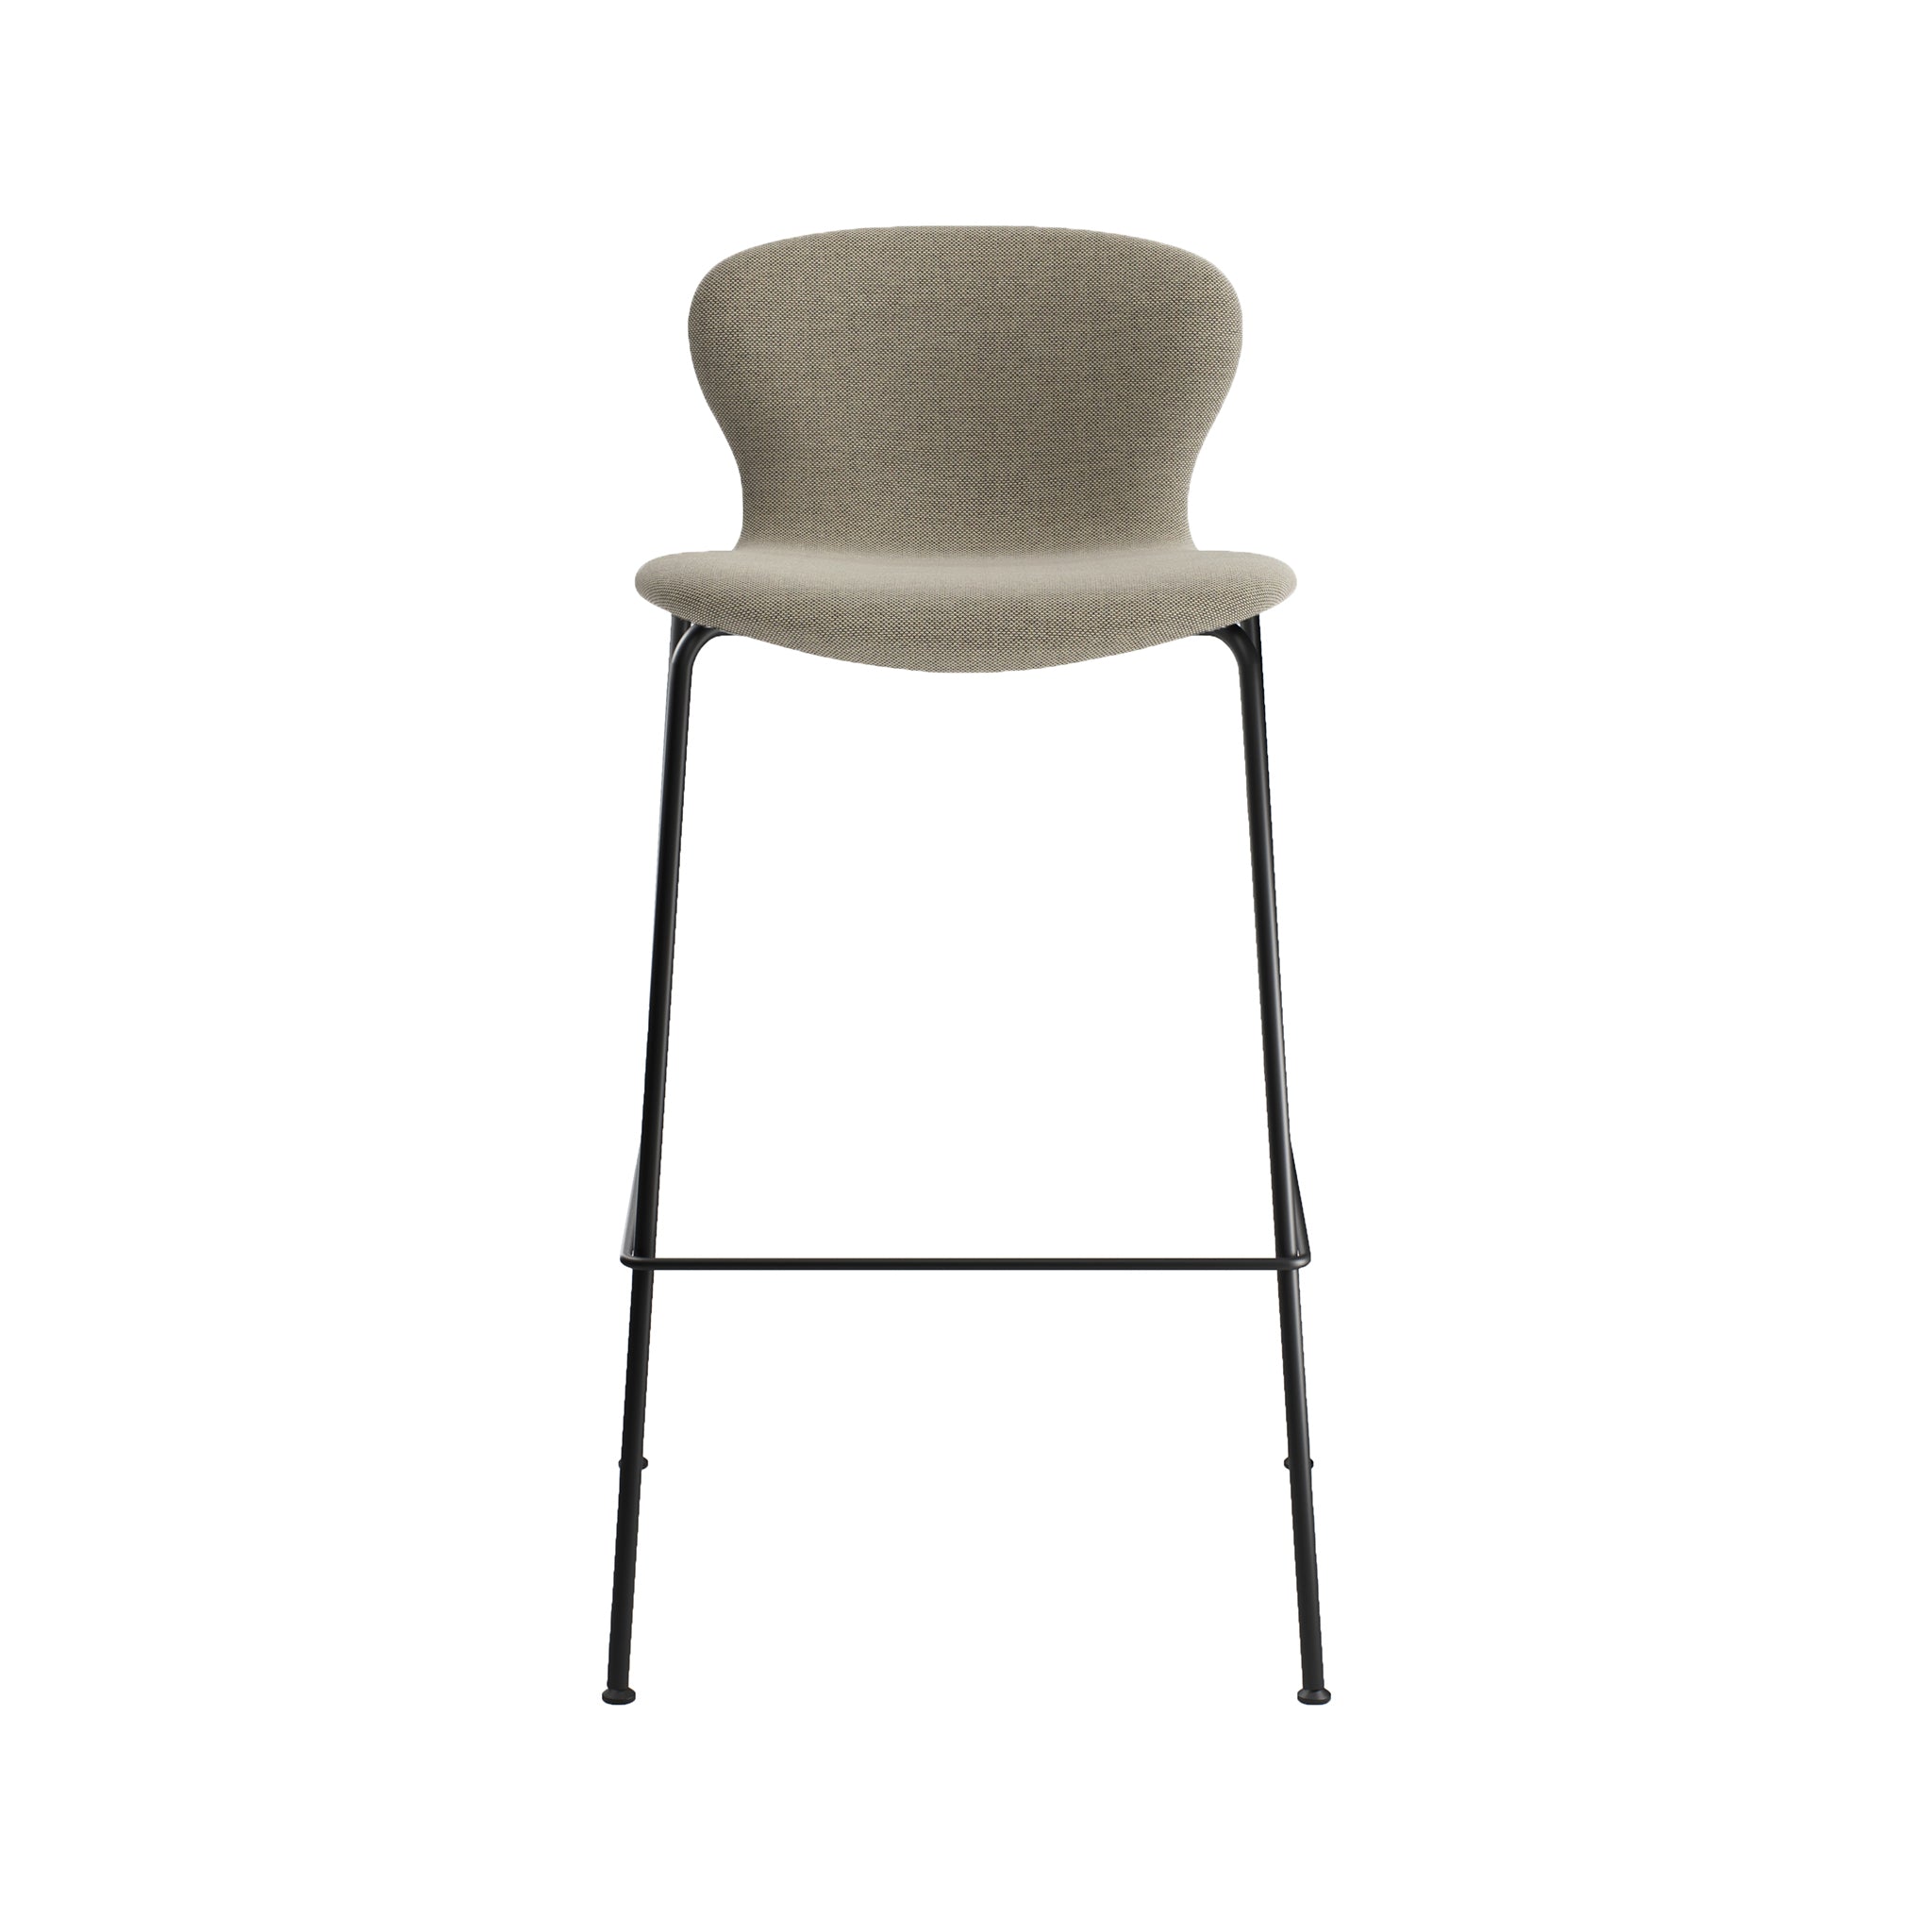 Bar stools and counter stools » Get stylish seating for any bar